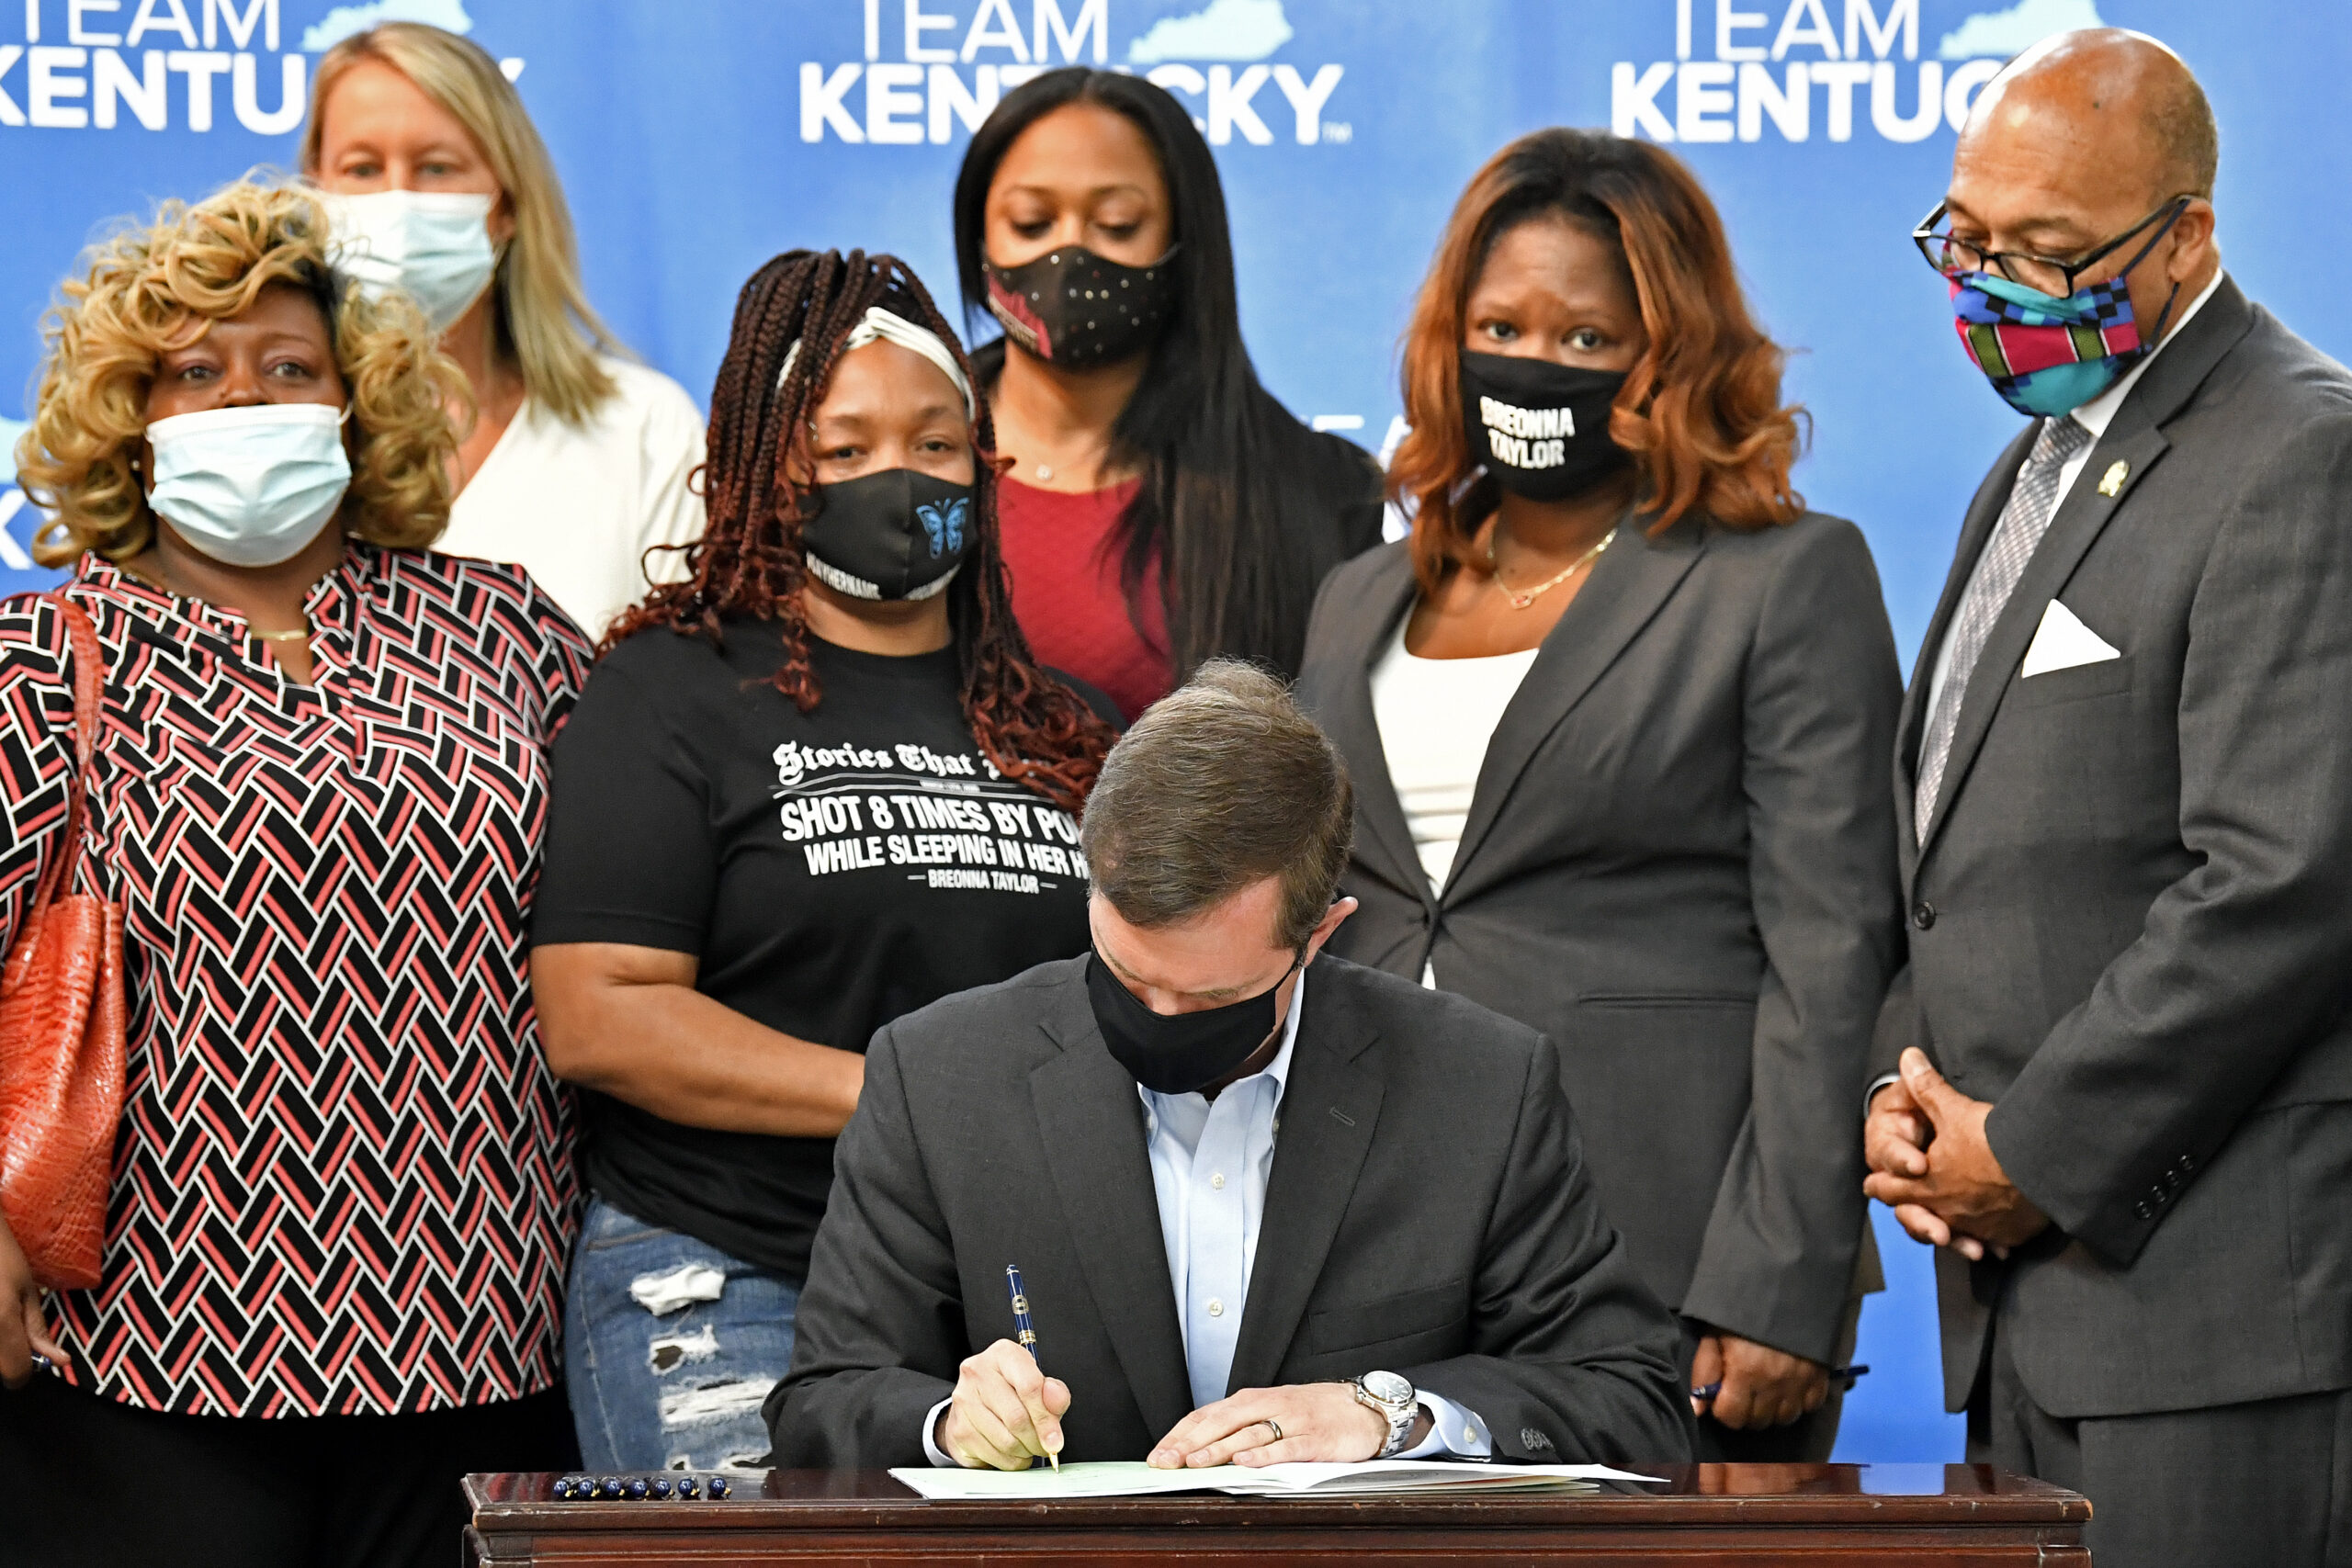 Kentucky Gov. Andy Beshear signs a bill creating a partial ban on no-knock warrants, Friday, April 9, 2021, at the Center for African American Heritage Louisville, Ky. At the signing is Tamika Palmer, the mother of Breonna Taylor, behind Governor left. The bill signing comes after months of demonstrations set off by the fatal shooting of Taylor in her home during a botched police raid. (AP Photo/Timothy D. Easley)